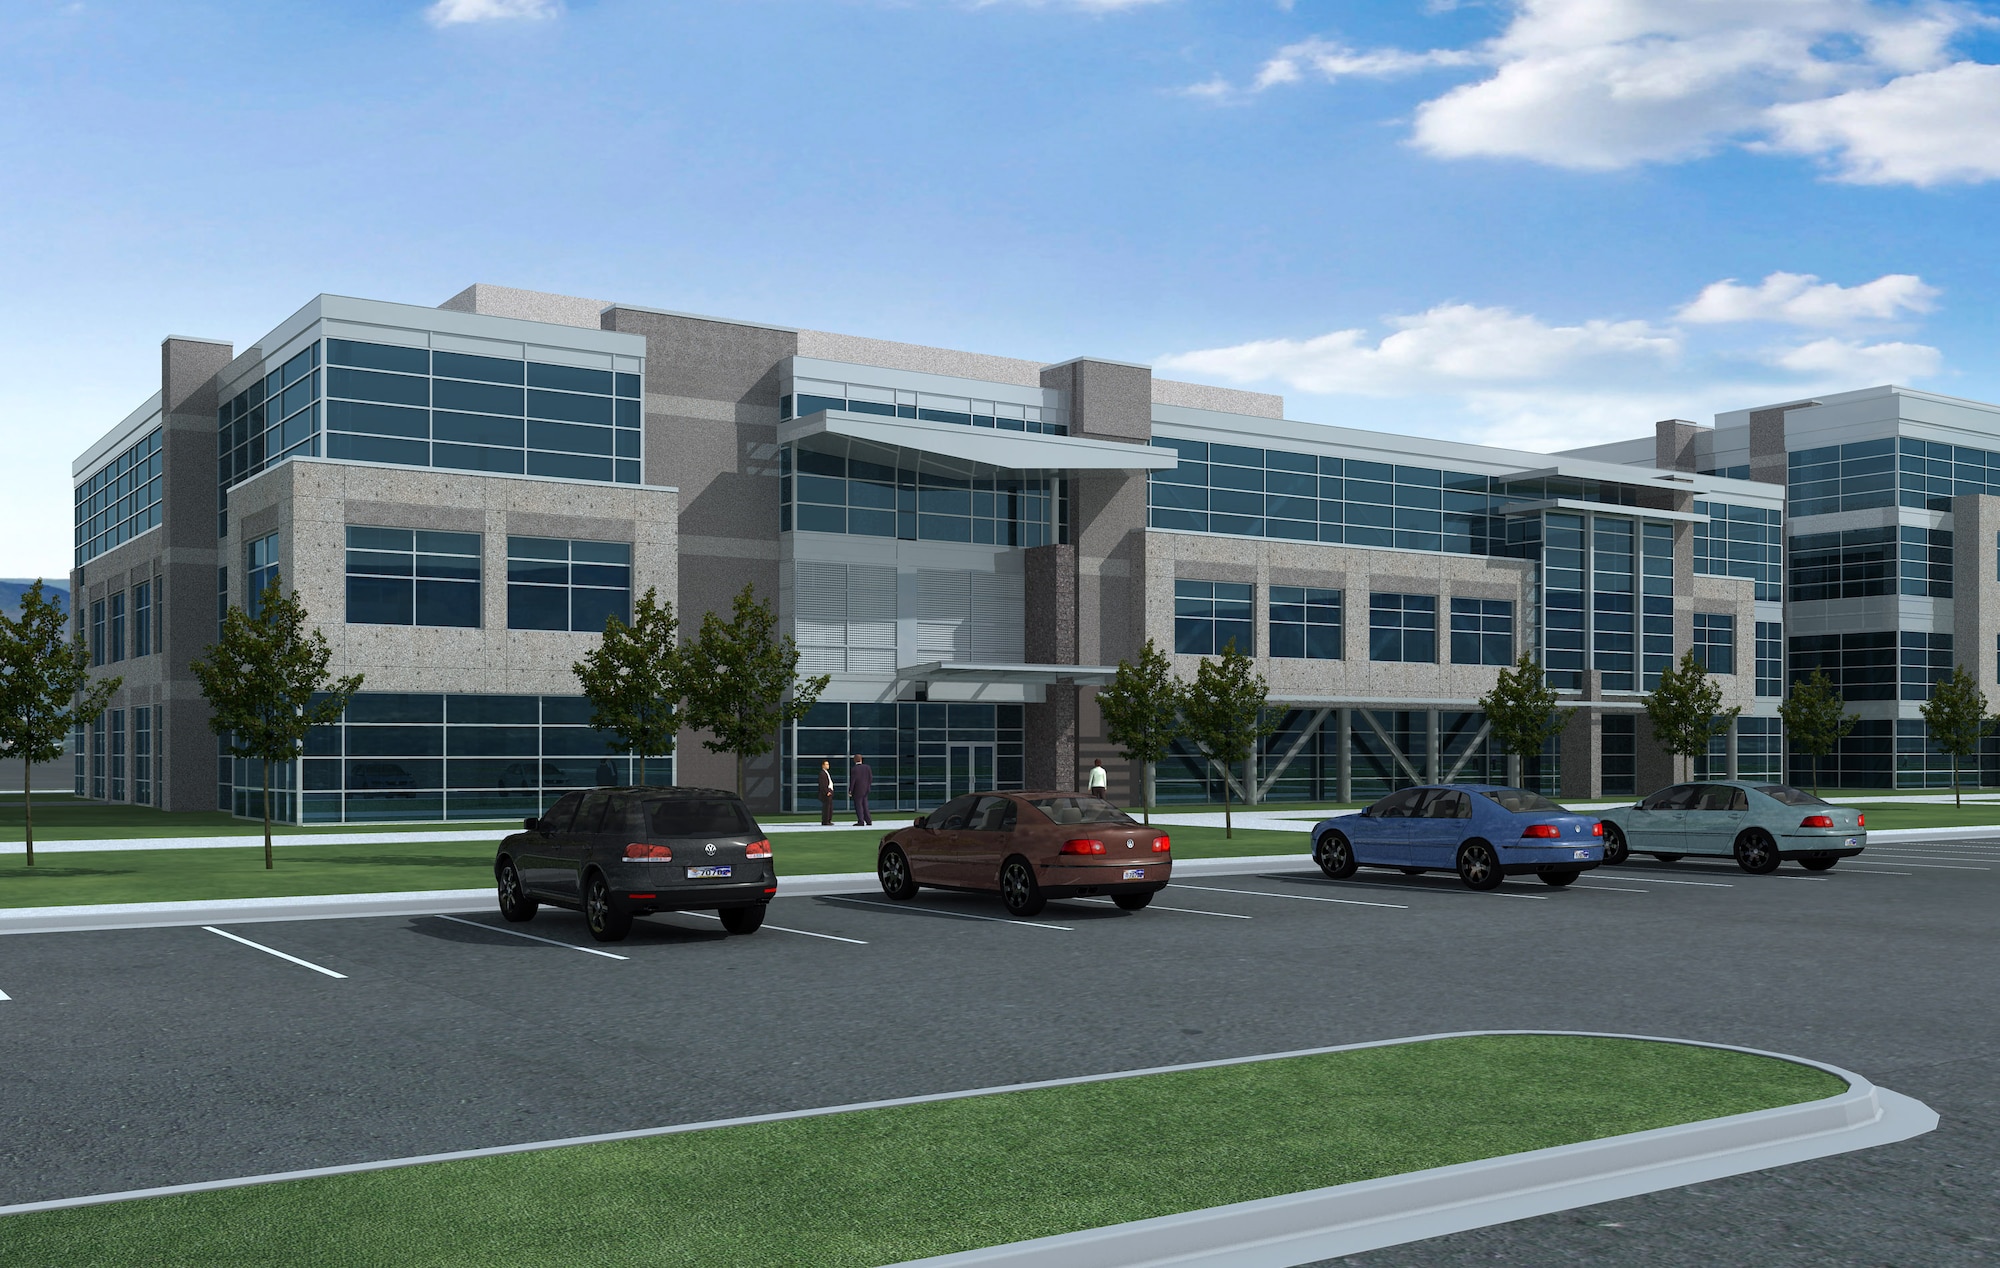 Artists rendering of Bldg. 1580, part of the Falcon Hill Enhanced Use Lease Program at Hill Air Force Base. (Graphic courtesy of Sunset Ridge Development Partners)